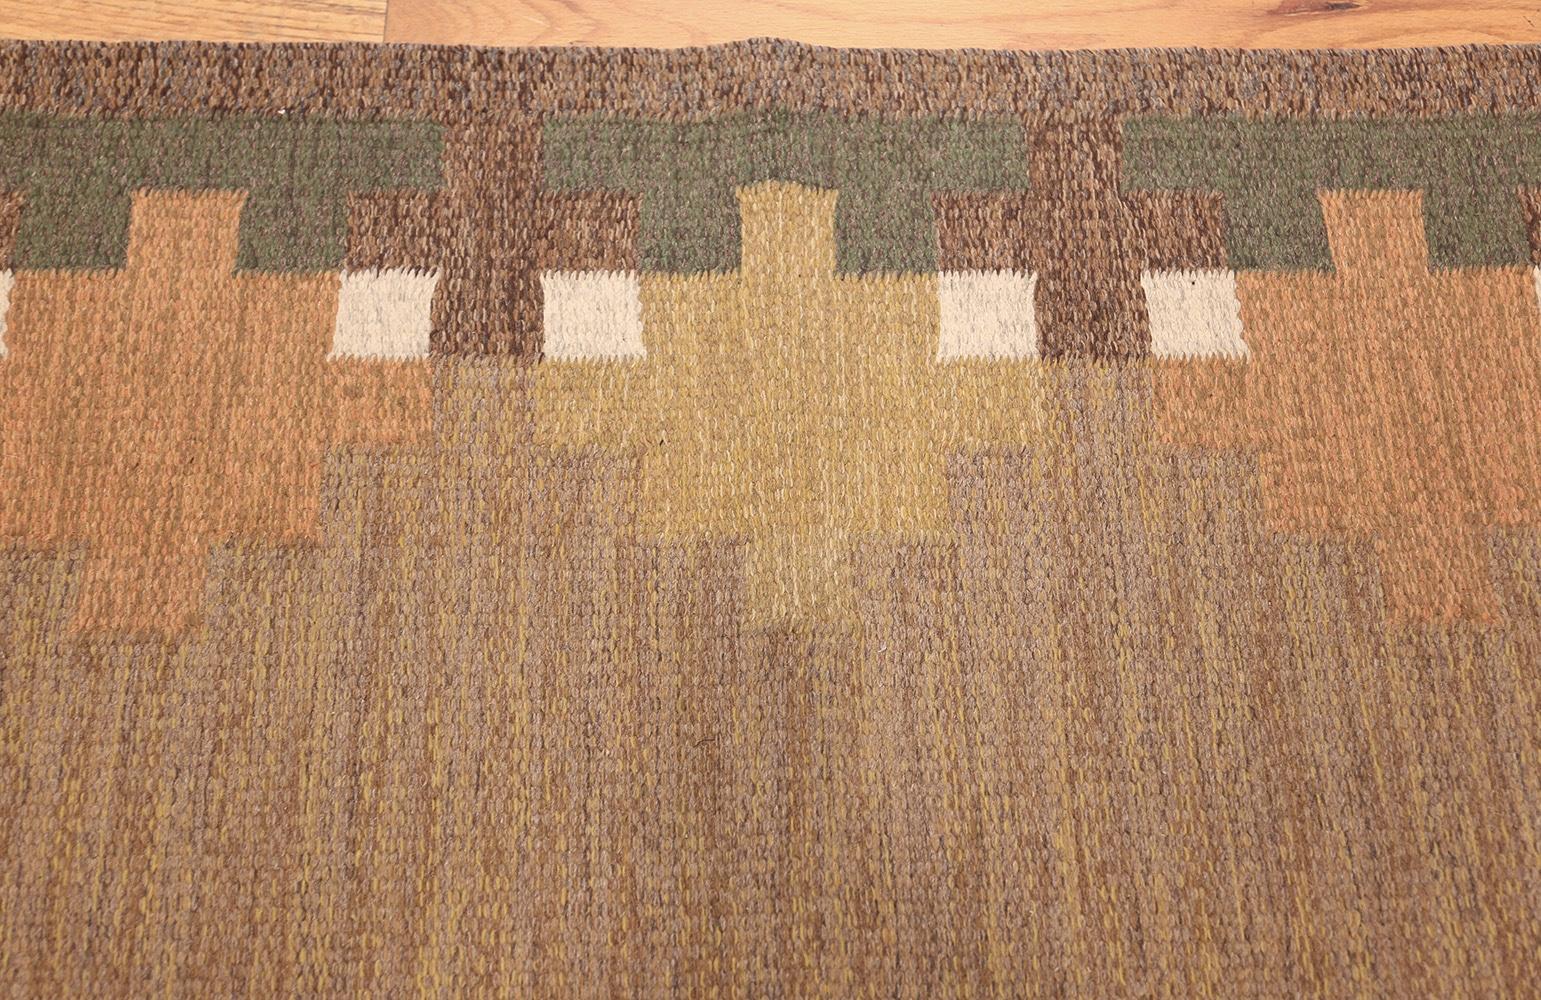 Vintage Swedish Rug Signed Ulla Parkdal, Country of Origin: Sweden, Circa date: Mid 20th Century. Size: 5 ft 4 in x 8 ft (1.63 m x 2.44 m)

